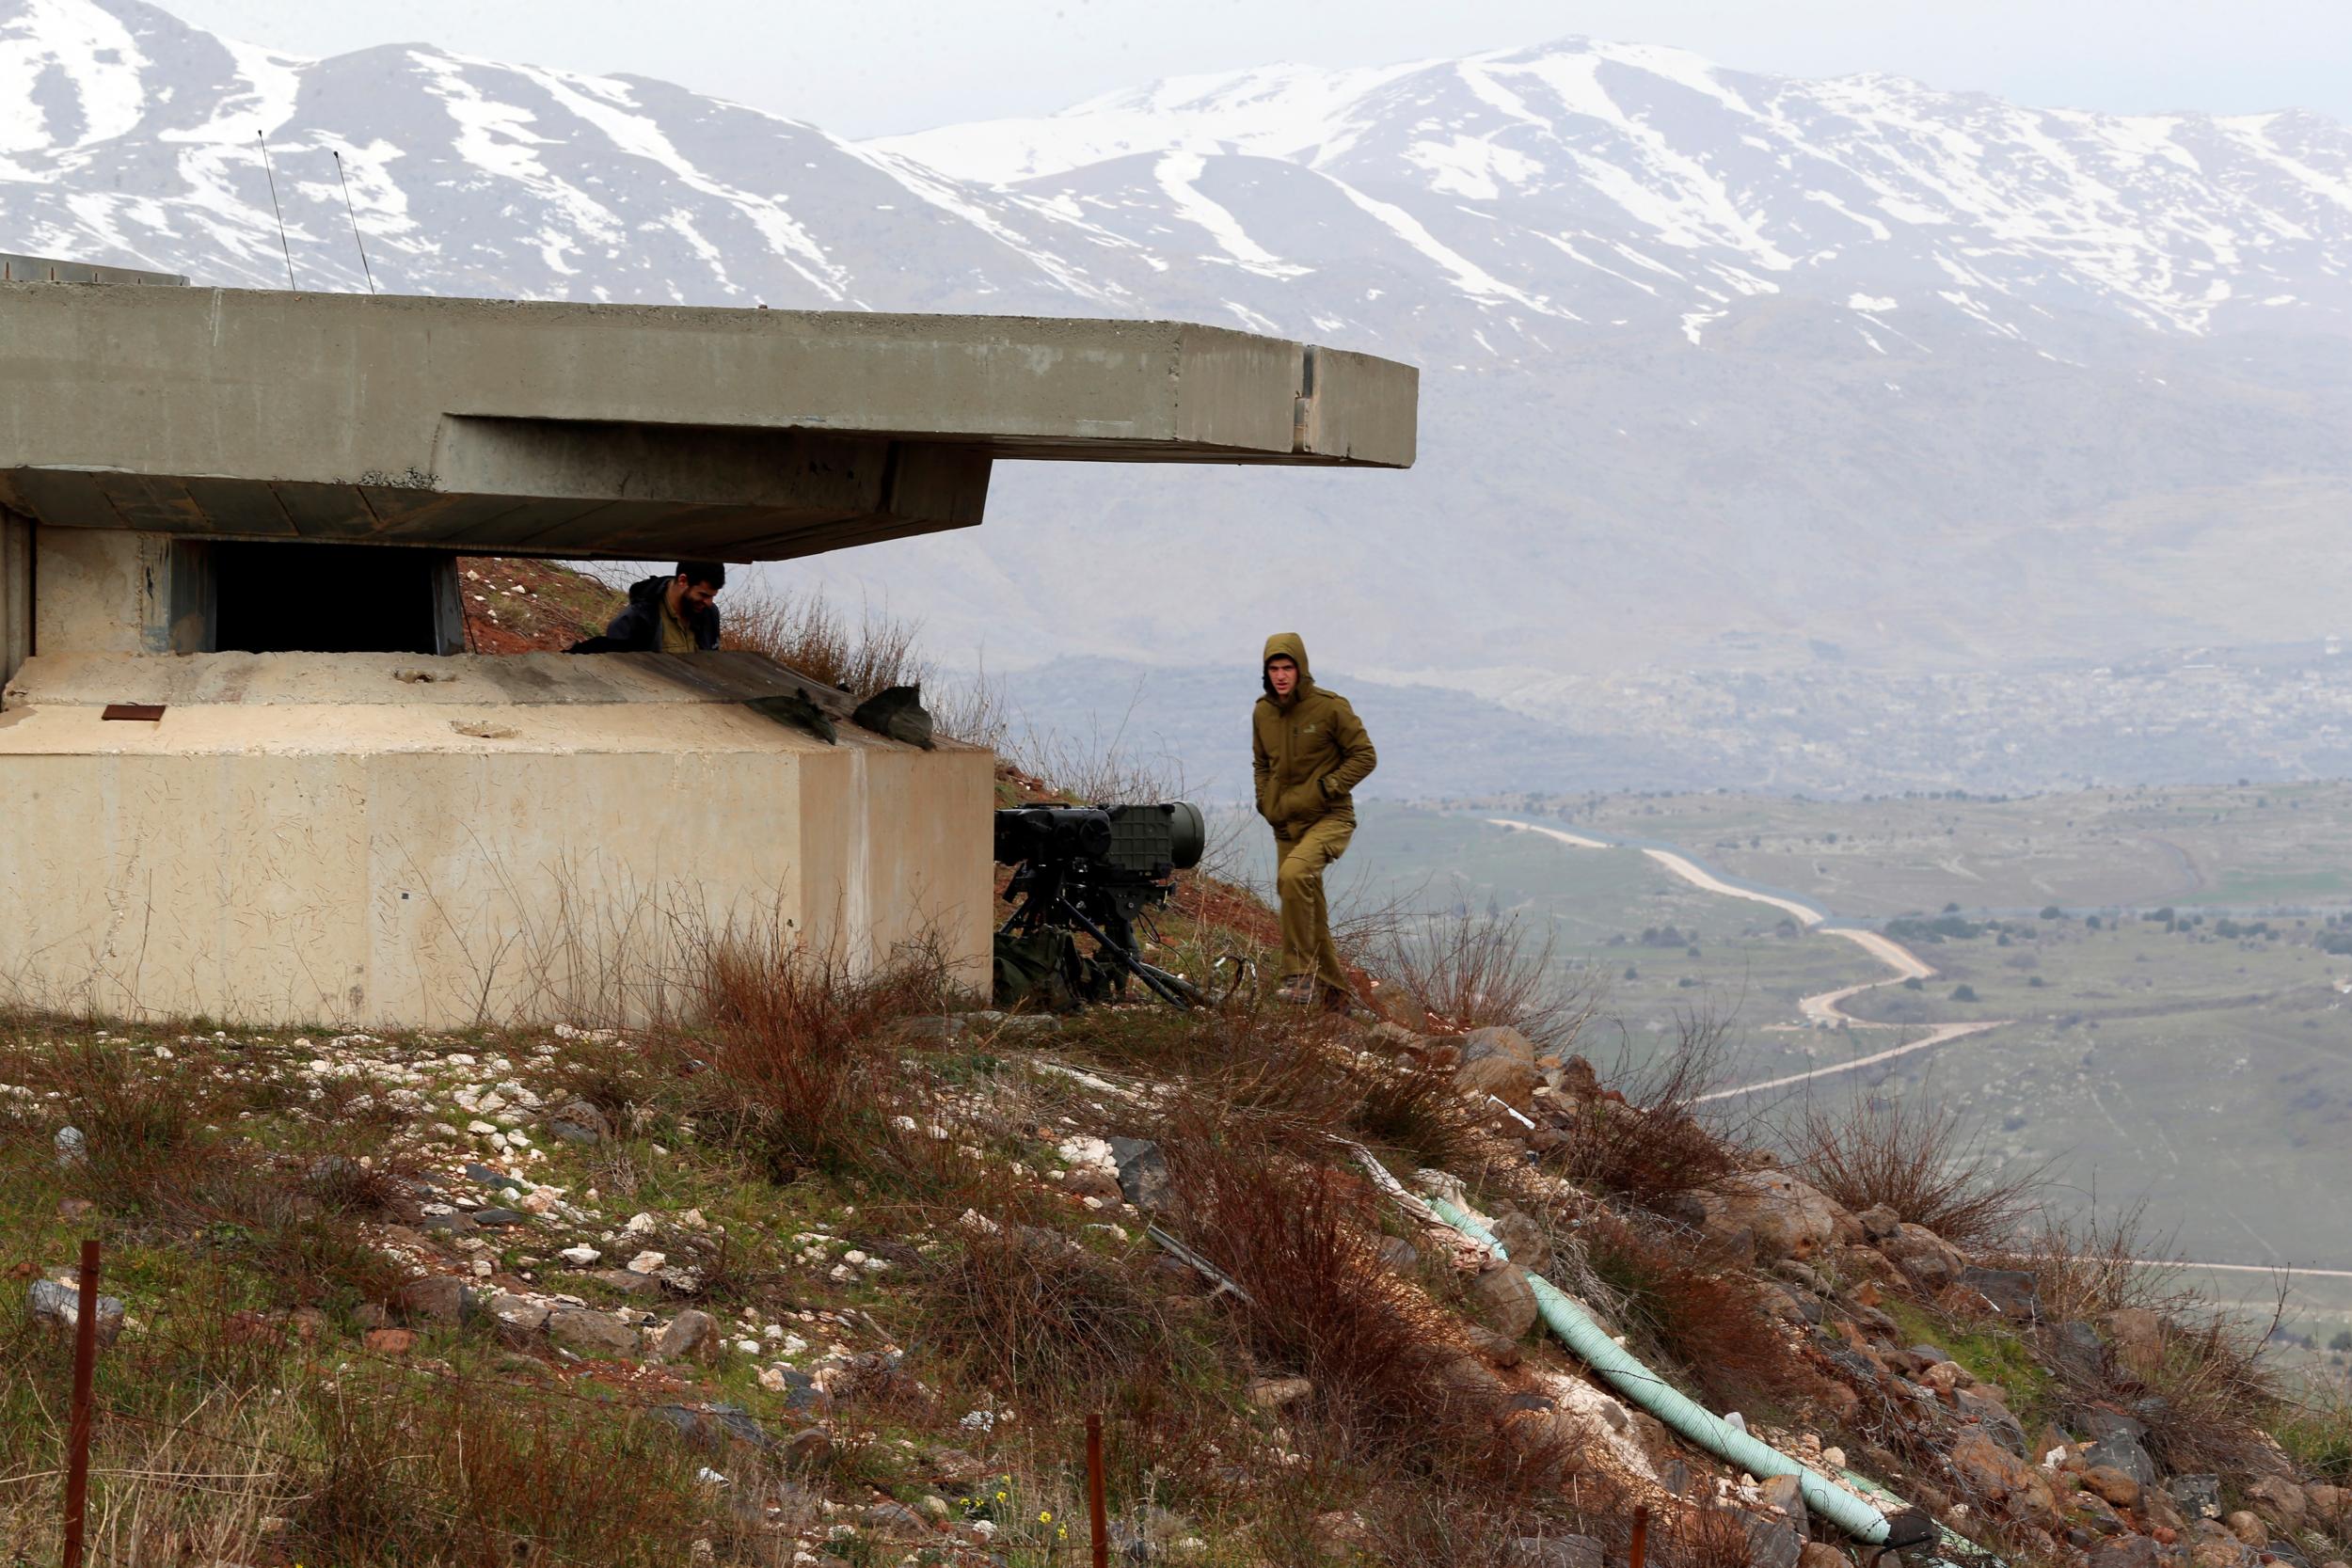 An Israeli soldier walks up to a military post close to the Druze village of Majdal Shams in the Israeli-occupied Golan Heights on 10 February 2018